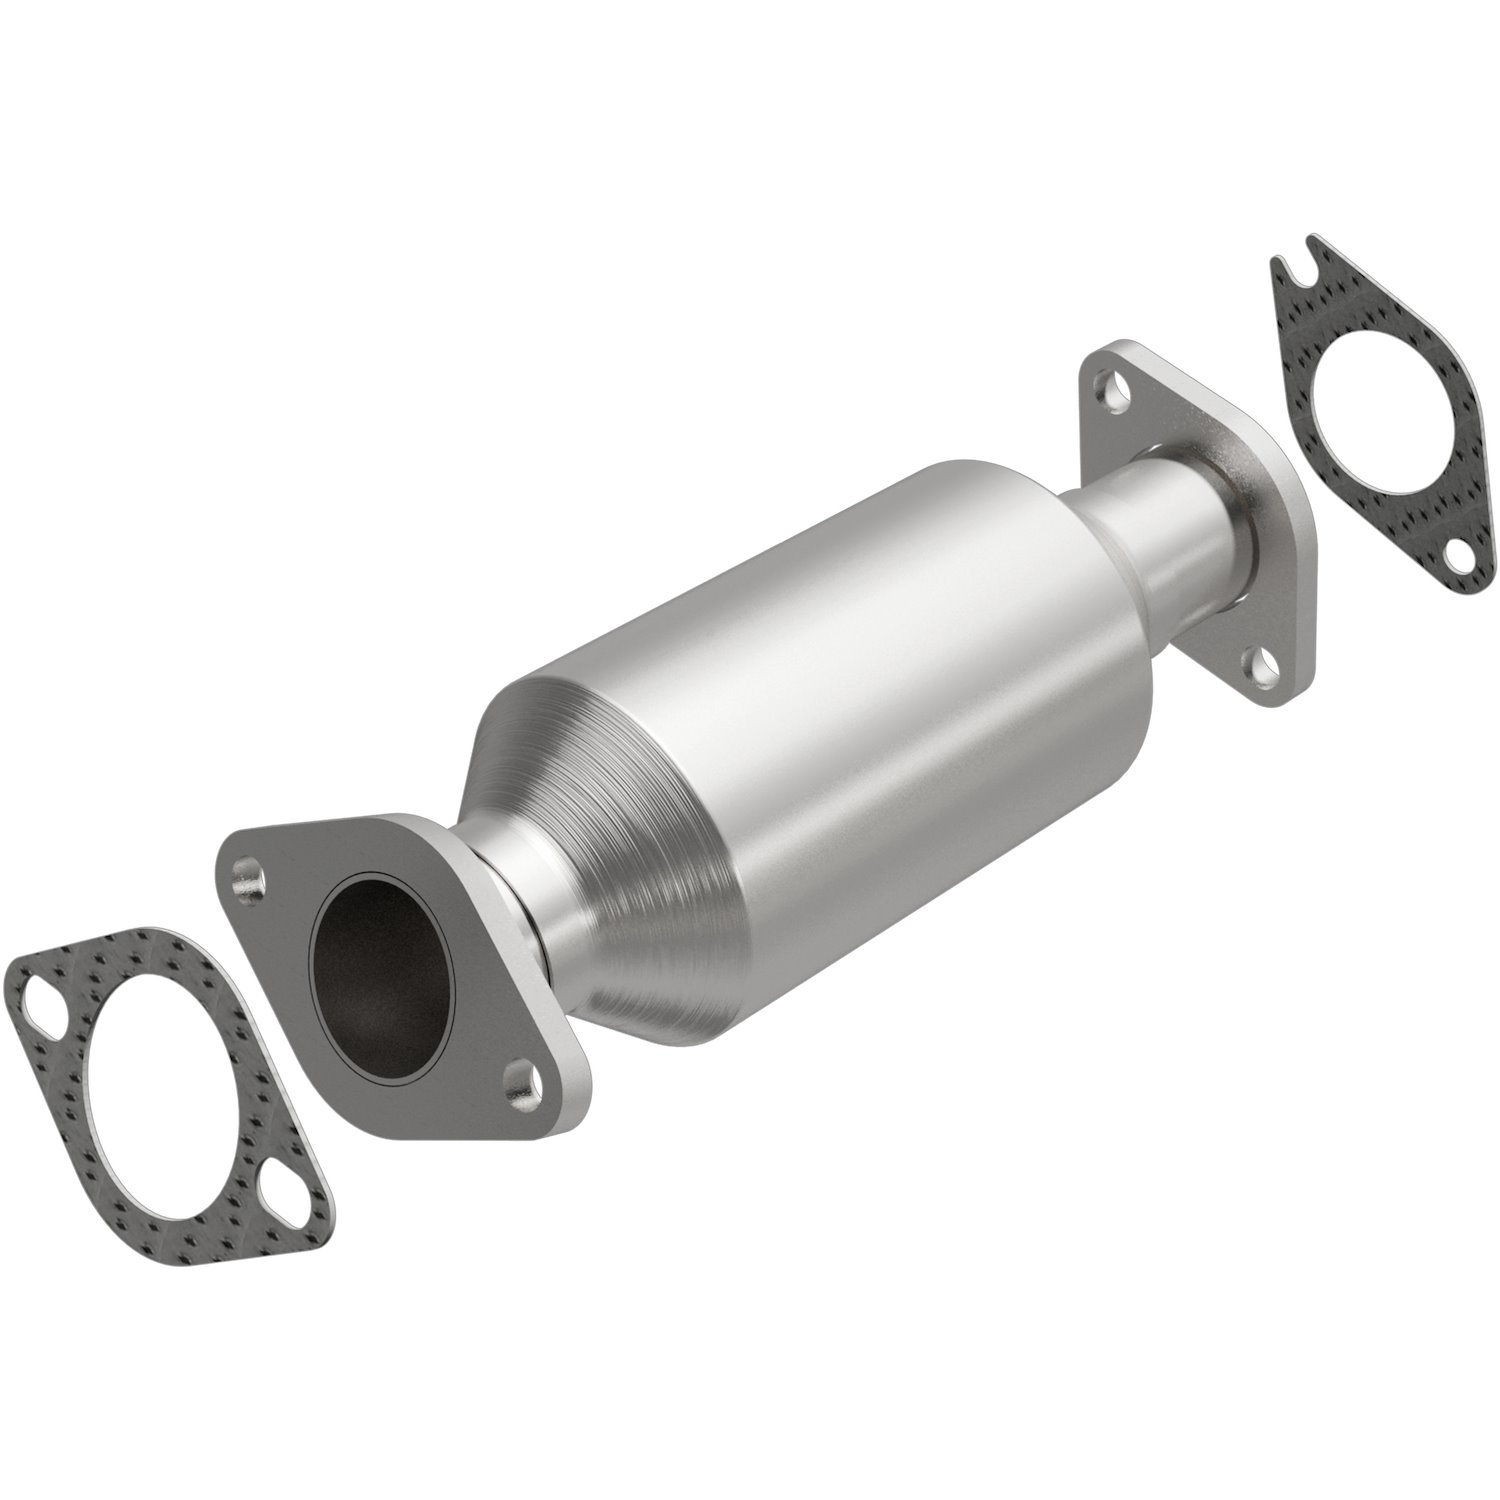 OEM Grade Federal / EPA Compliant Direct-Fit Catalytic Converter 52863